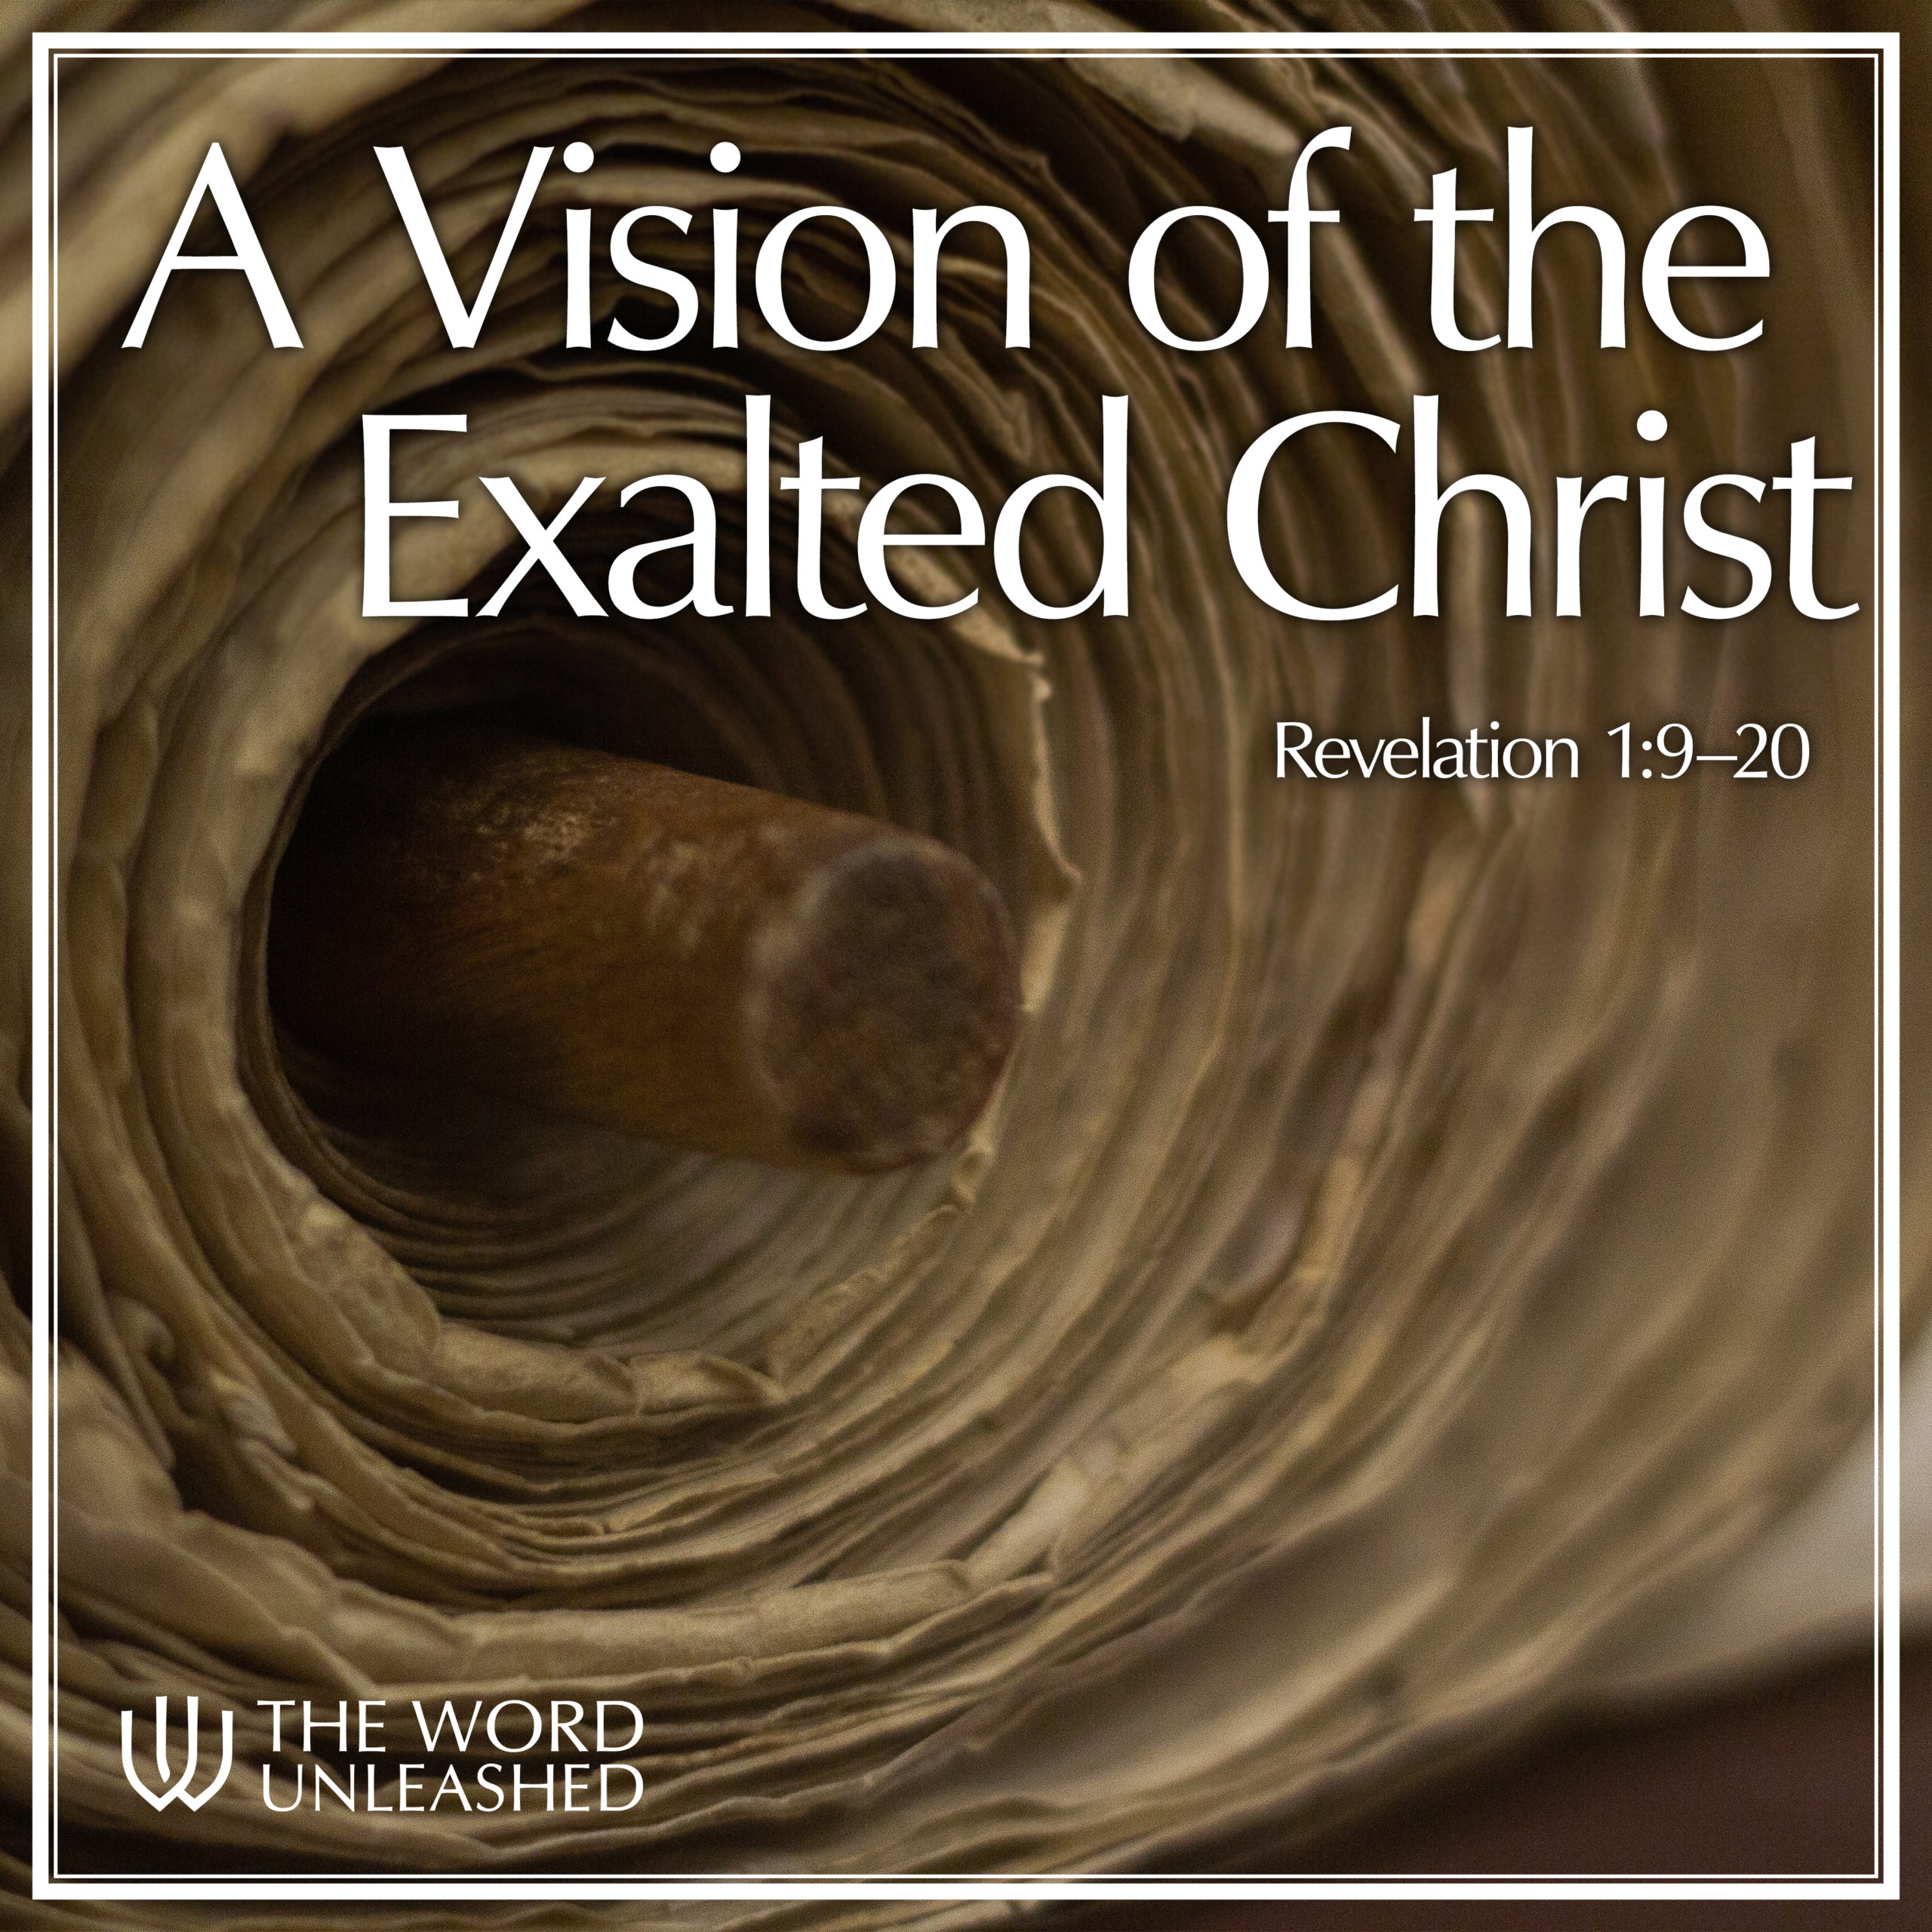 A Vision of the Exalted Christ